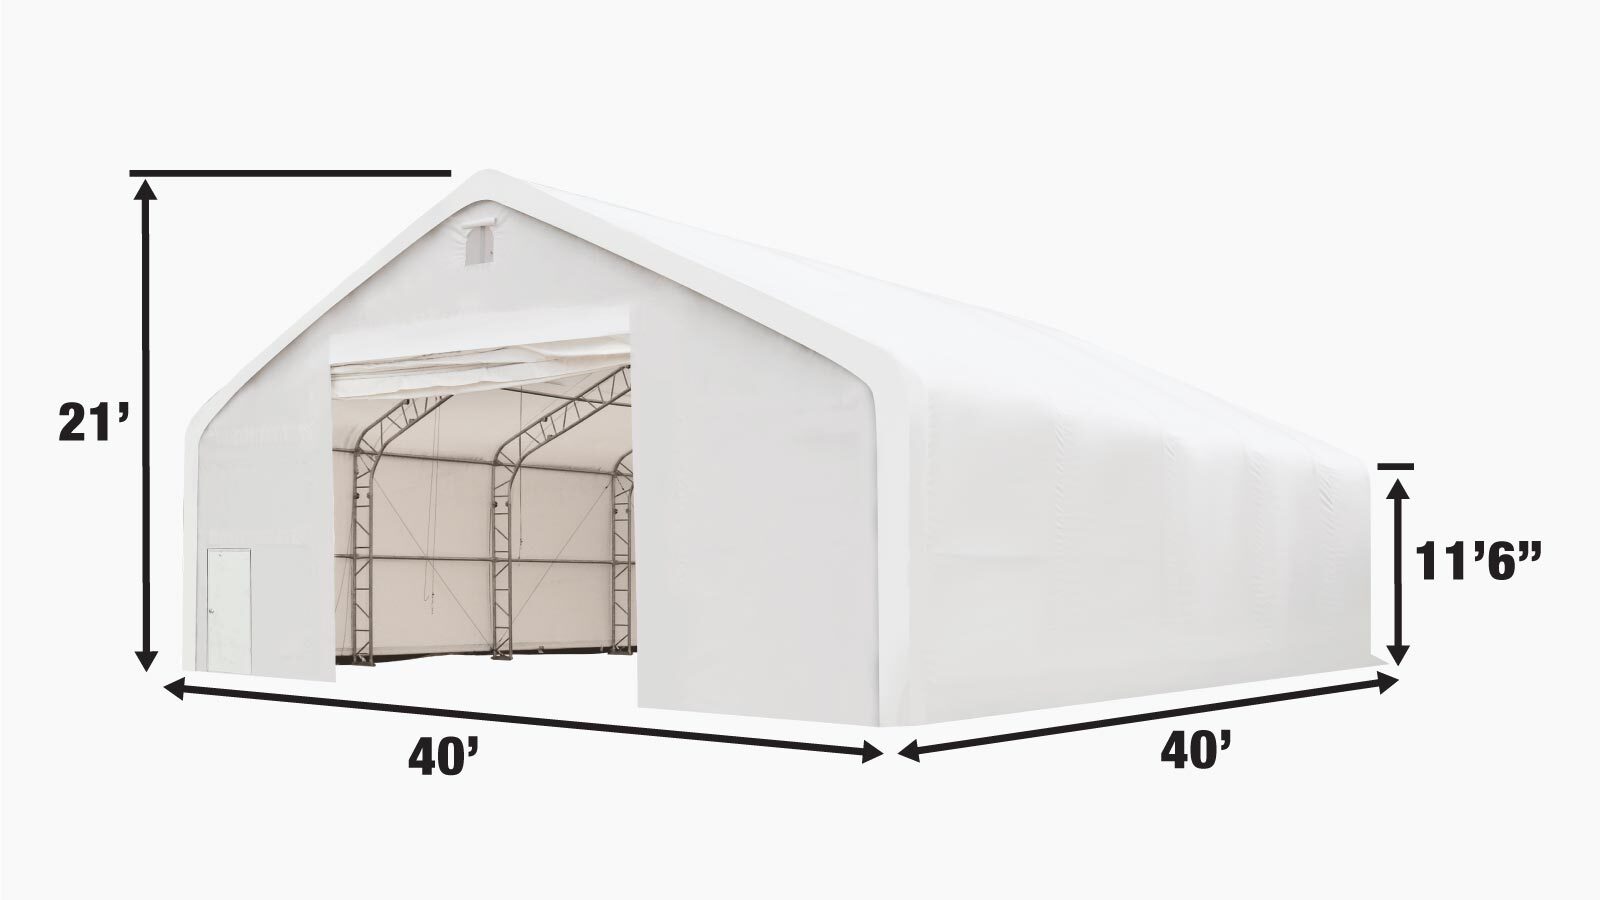 TMG Industrial Pro Series 40' x 40' Dual Truss Storage Shelter with Heavy Duty 21 oz PVC Cover & Drive Through Doors, TMG-DT4041-PRO (Previously TMG-DT4040-PRO)-specifications-image